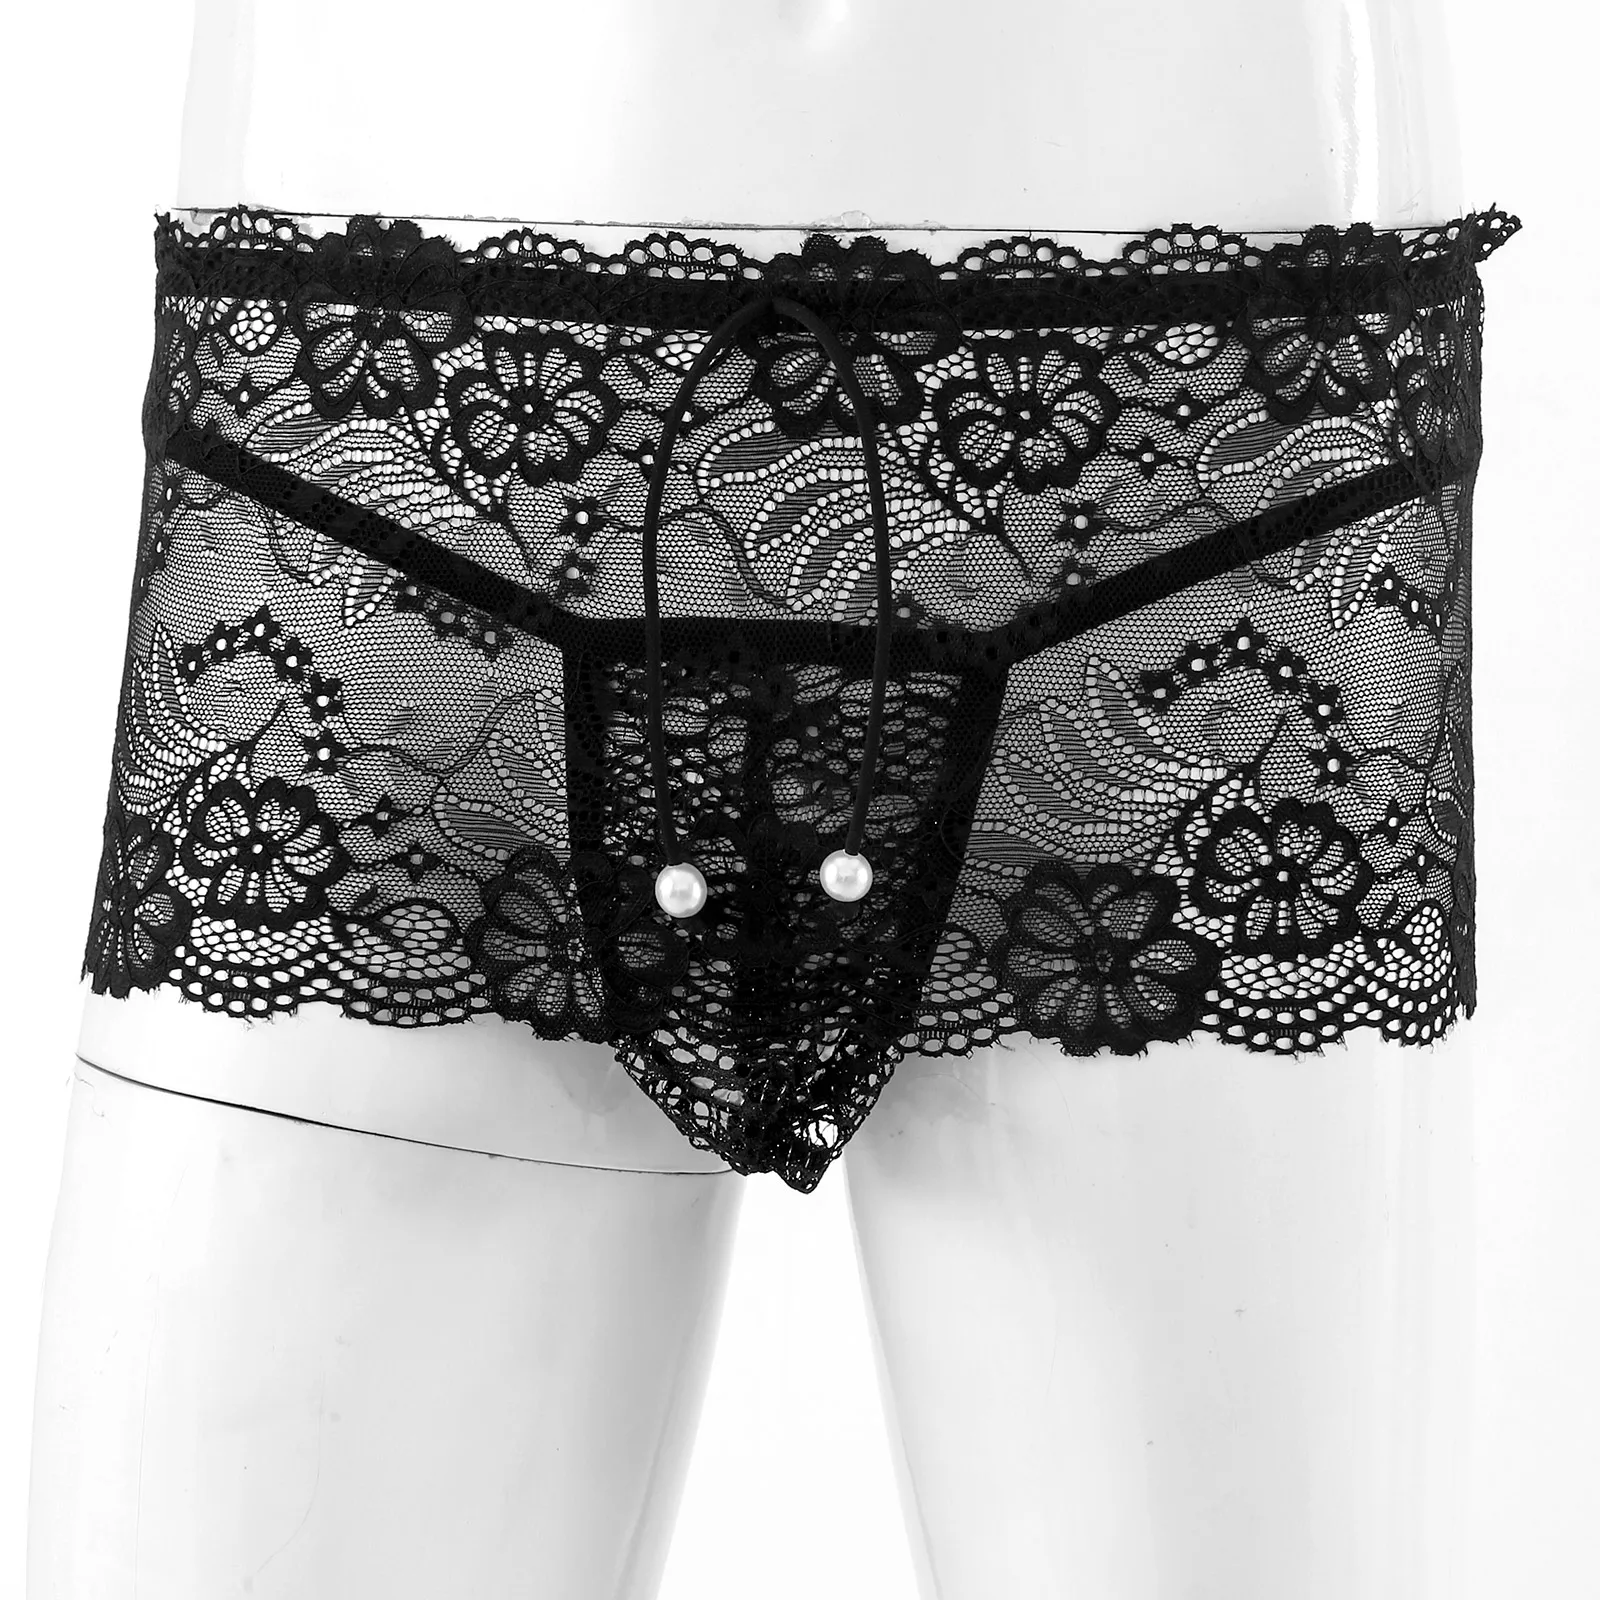 string thongs Men's Panties Erotic Sexy Lingerie Low Waist Sissy Male Gay Underwear See-through Lace Mini Skirt with Bulge Pouch G-strings most comfortable mens underwear